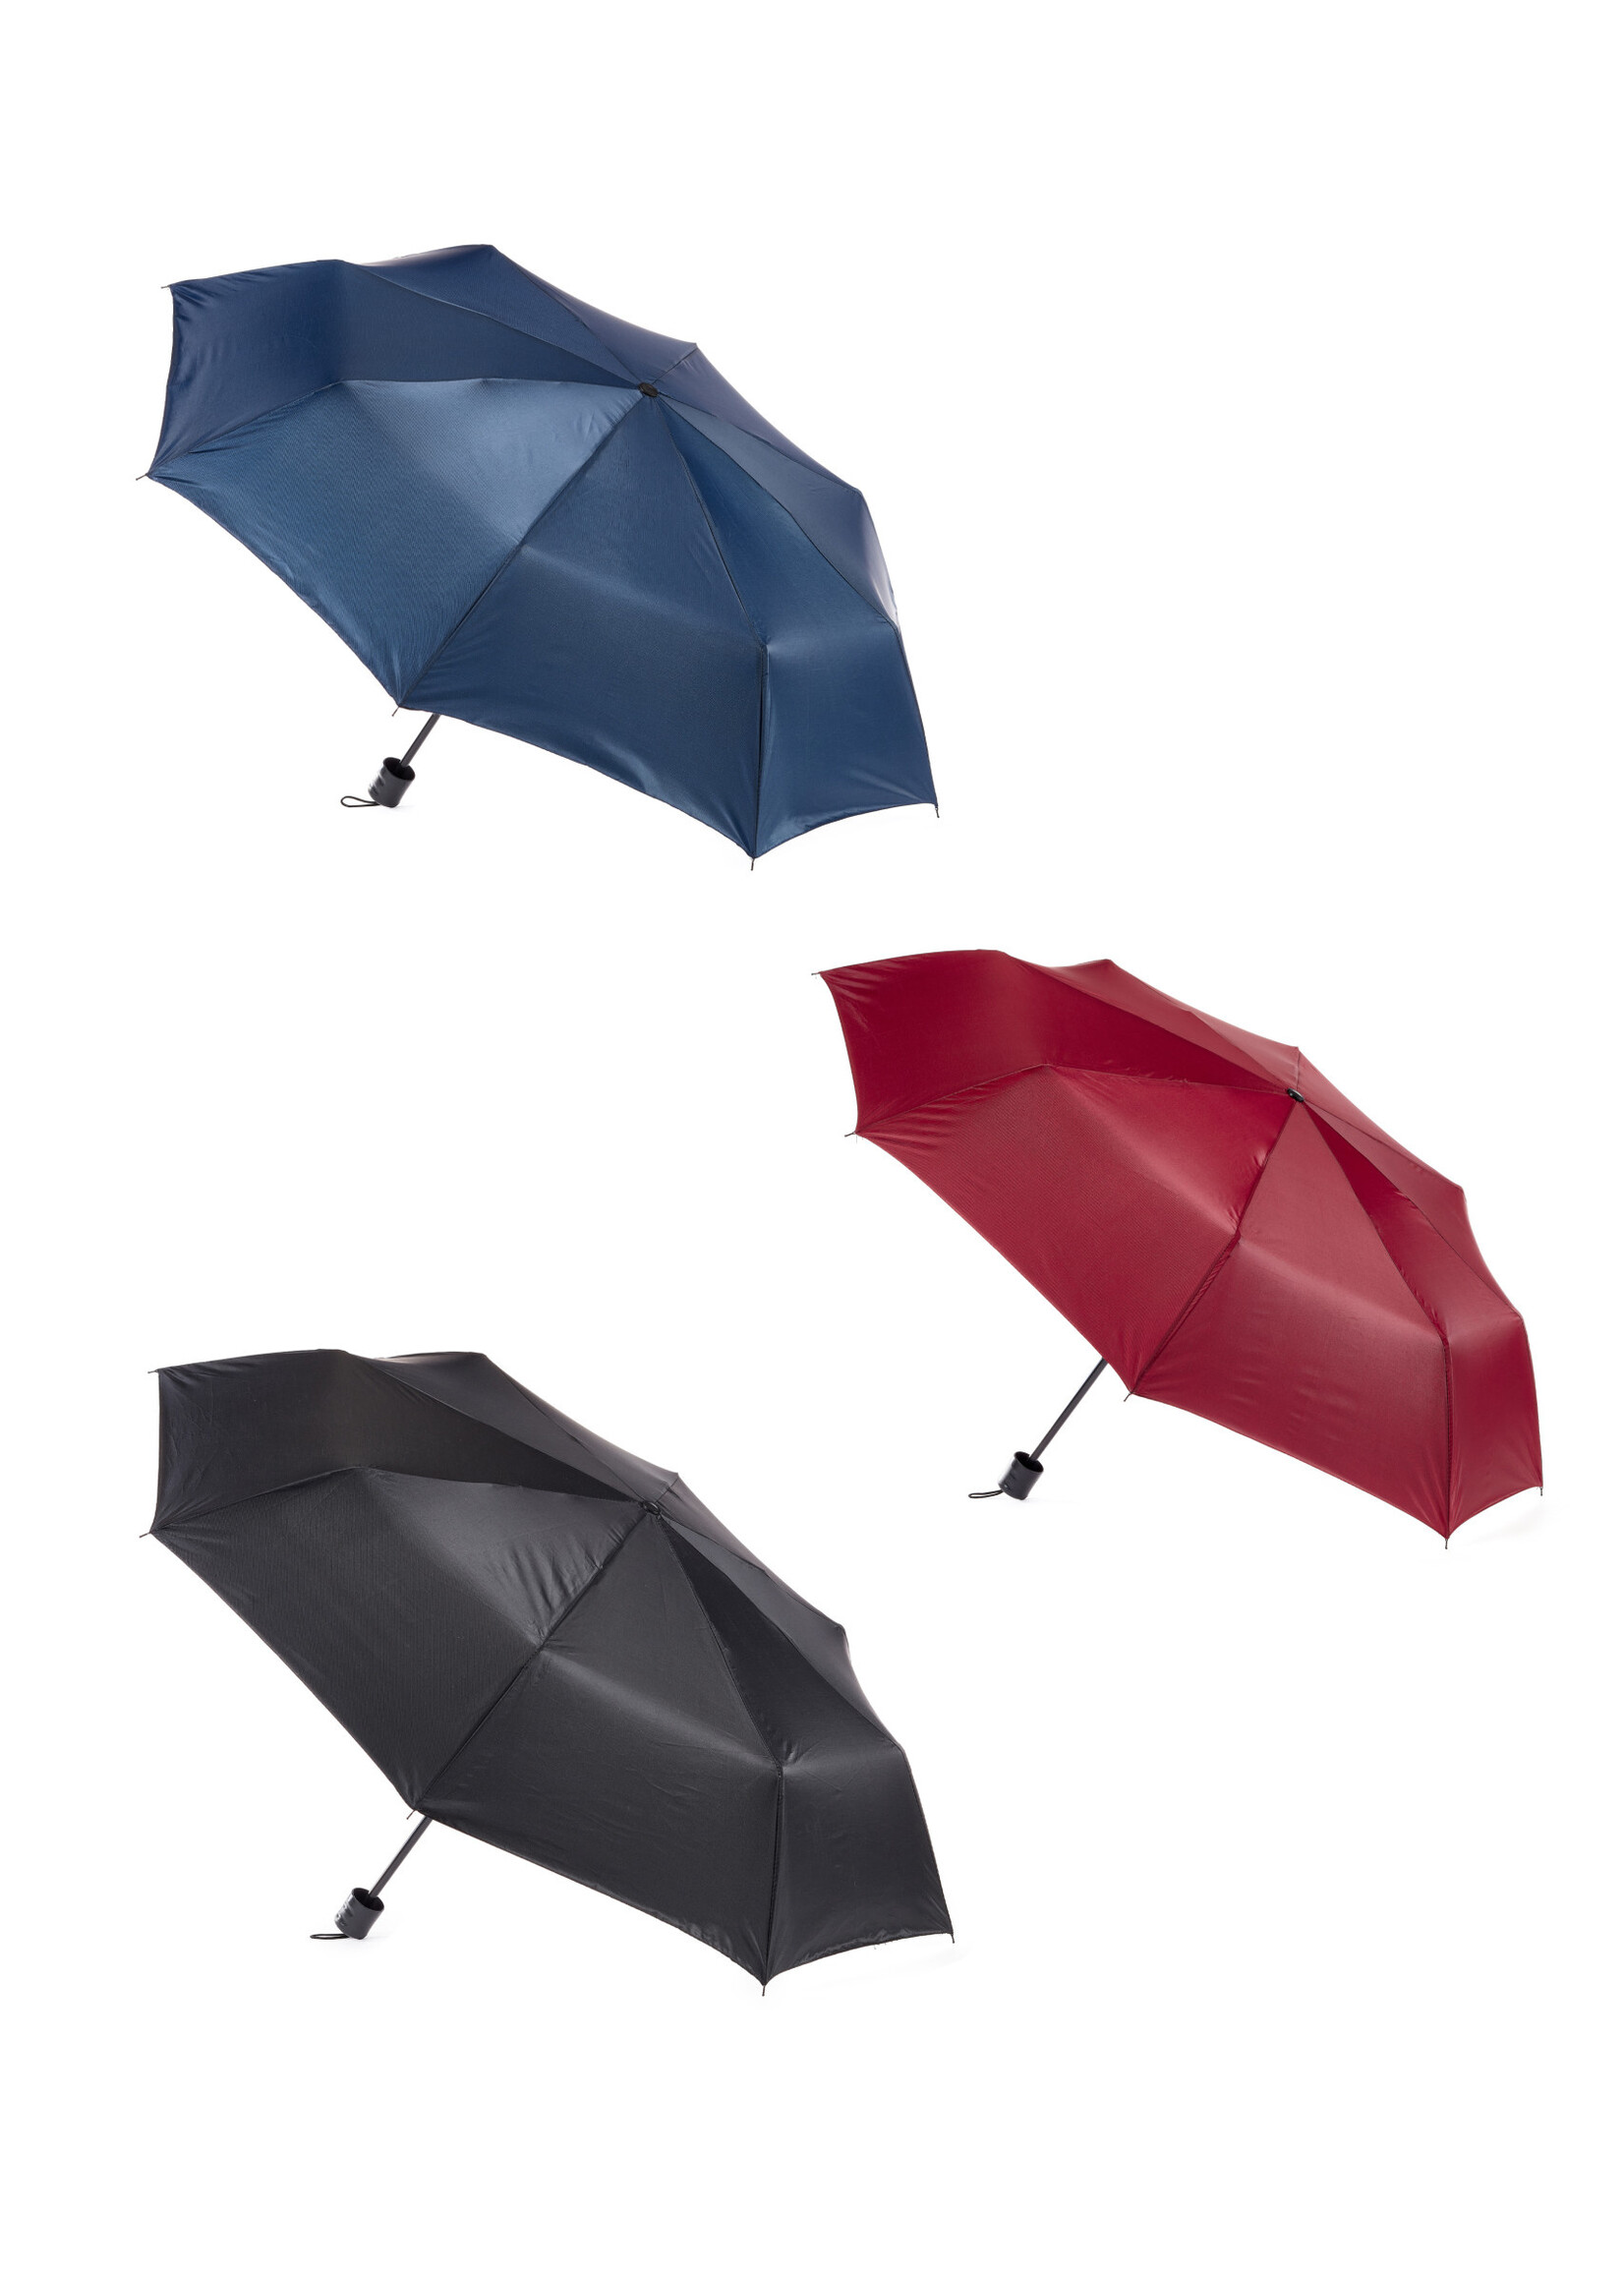 Yes Designs Collapsible Umbrella